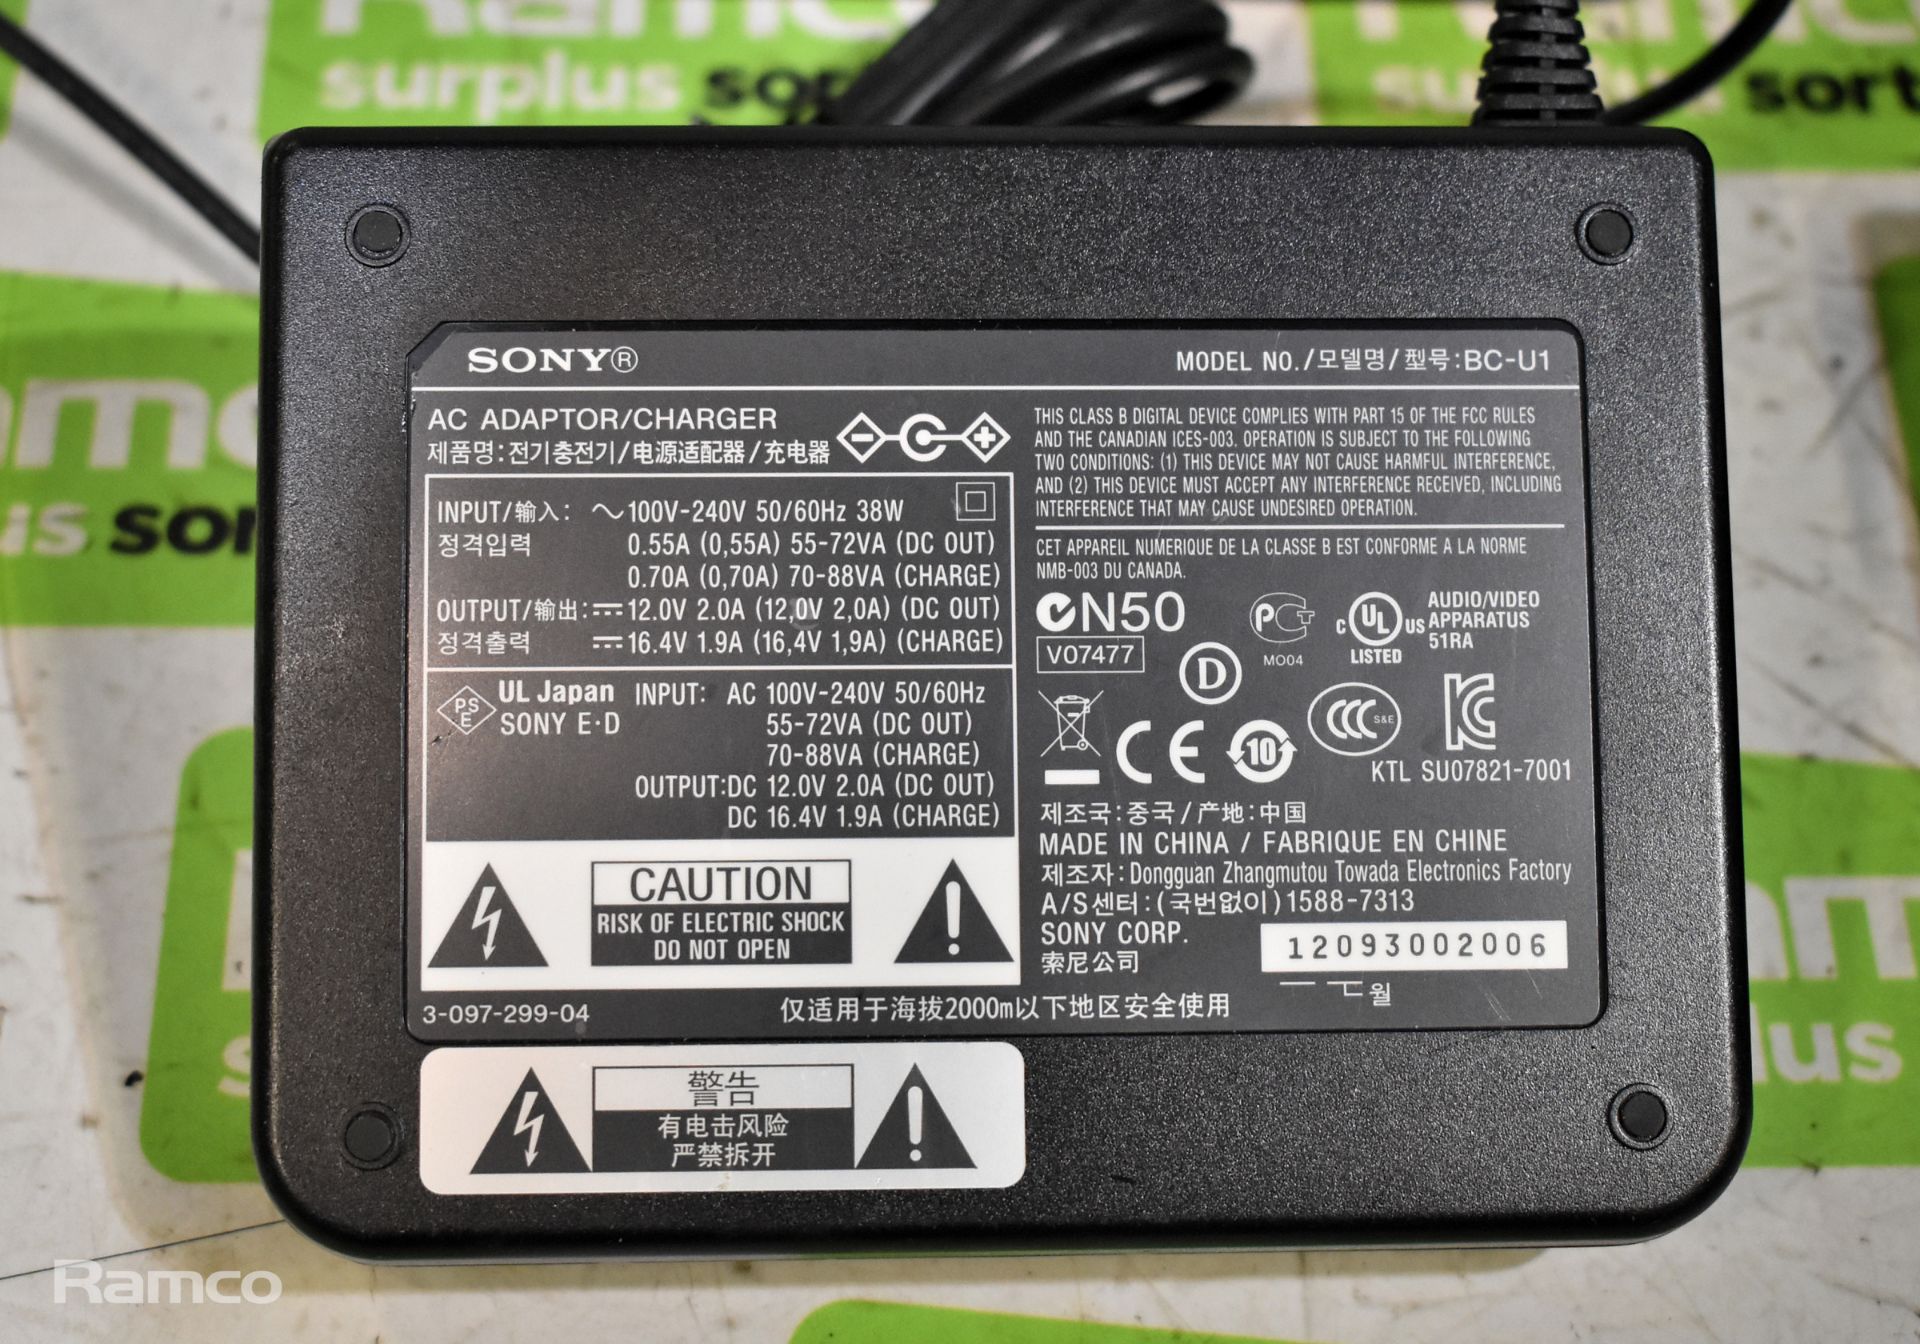 4x Sony BC-U1 battery chargers - Image 3 of 3